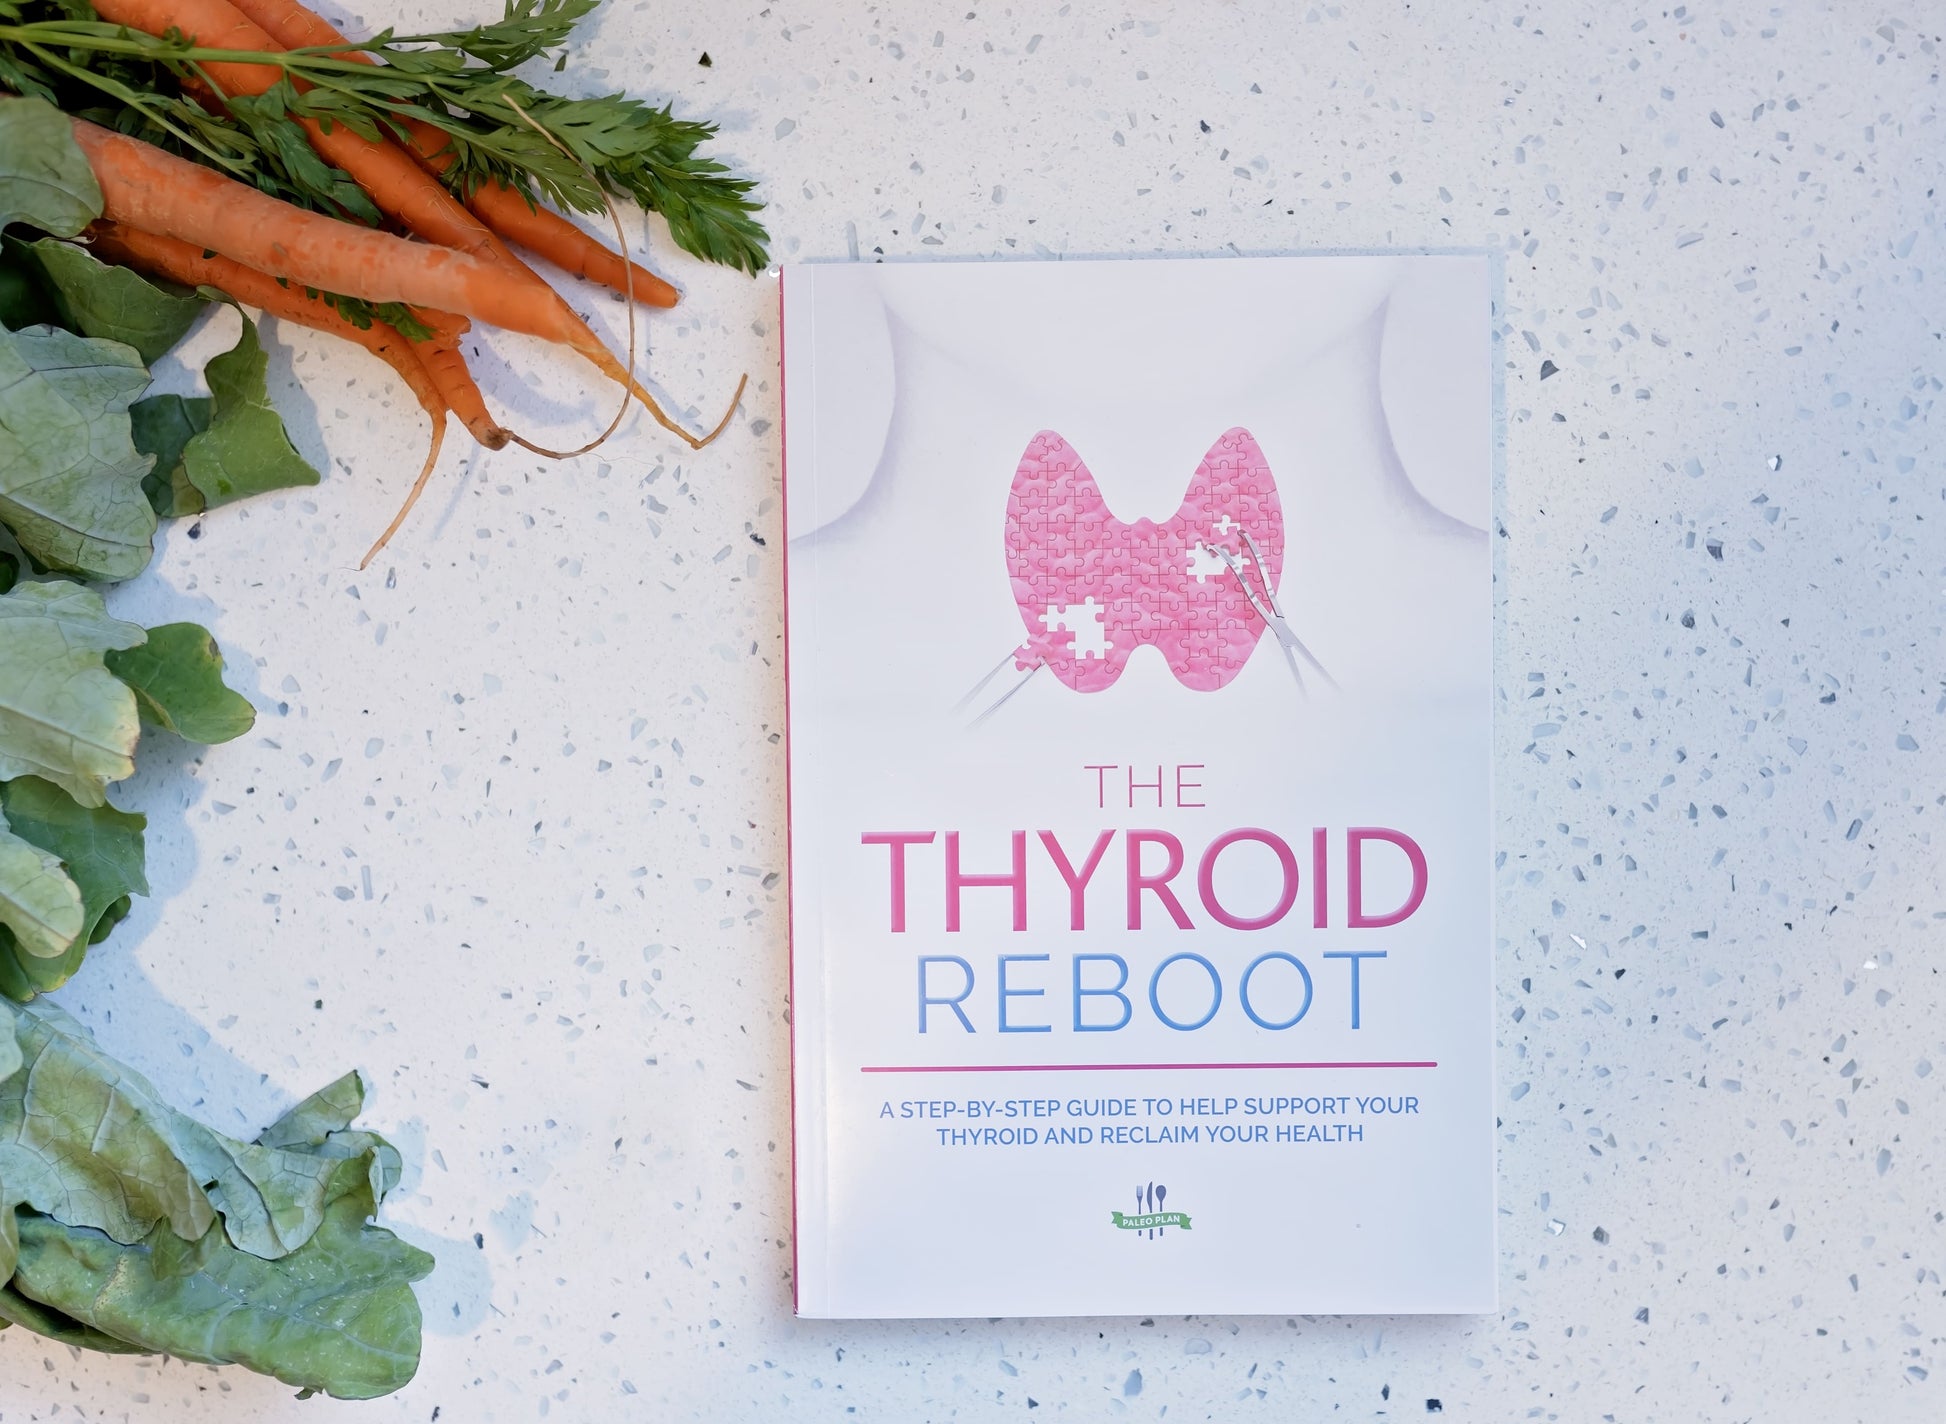 The Thyroid Reboot Book laid on a white marble surface. Vegetables can be seen on the left.